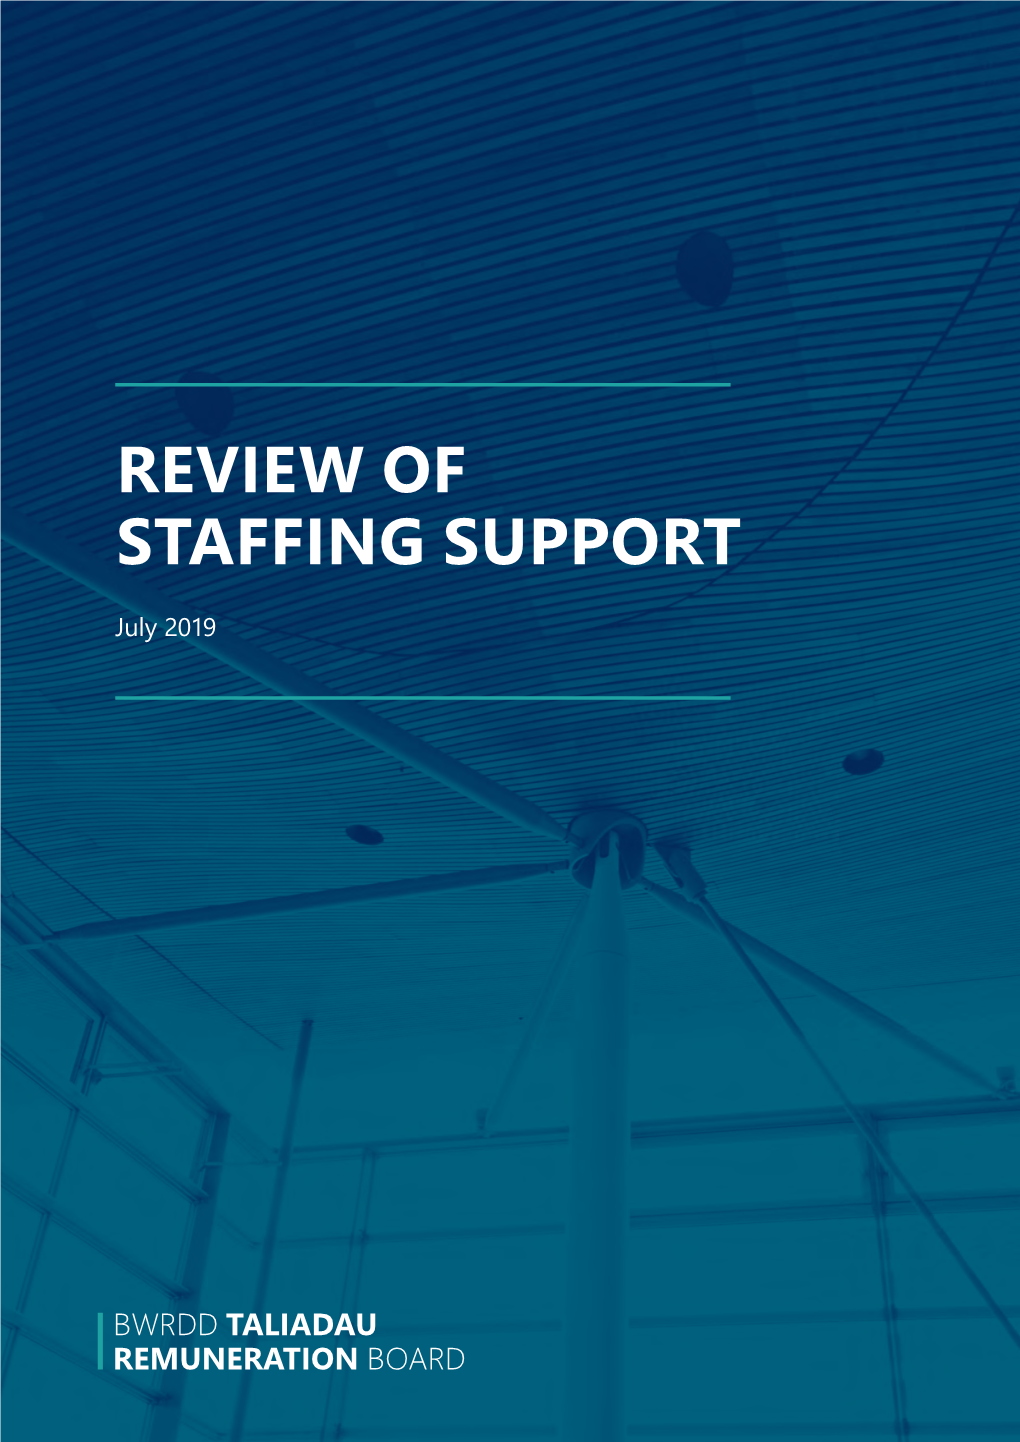 Review of Staffing Support